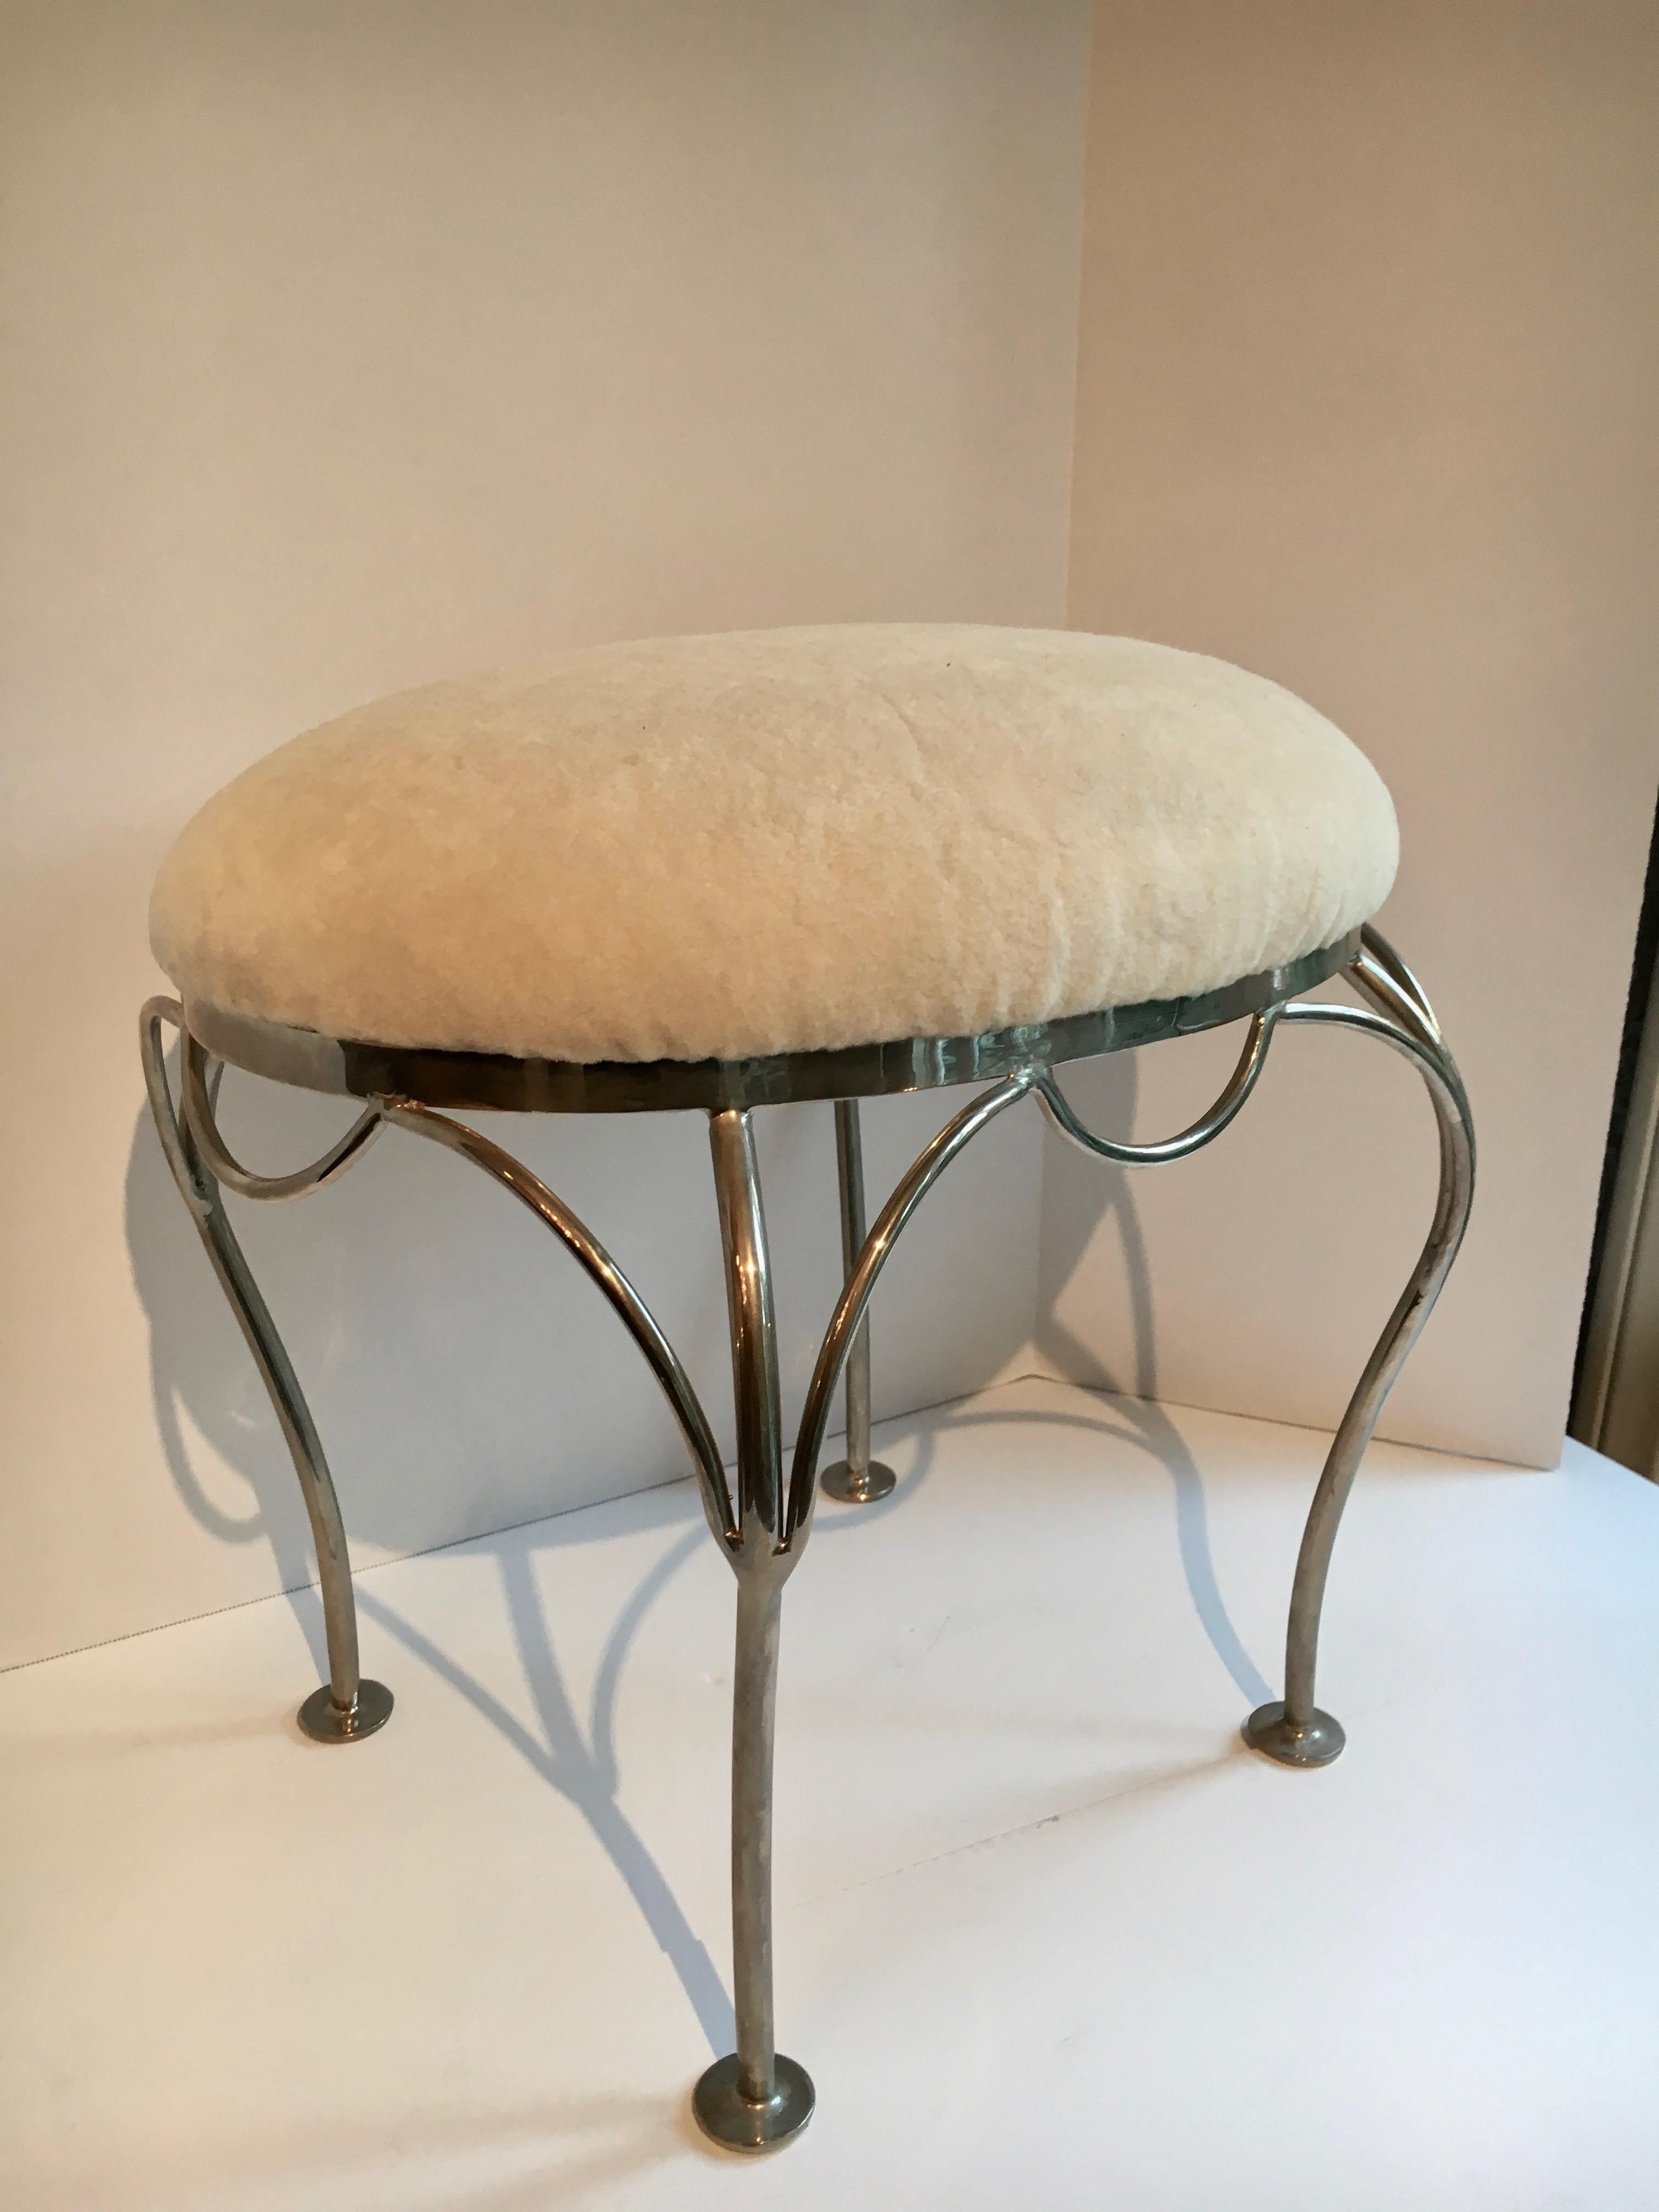 Nickel-Plated Vanity Stool with Shearling Seat 1